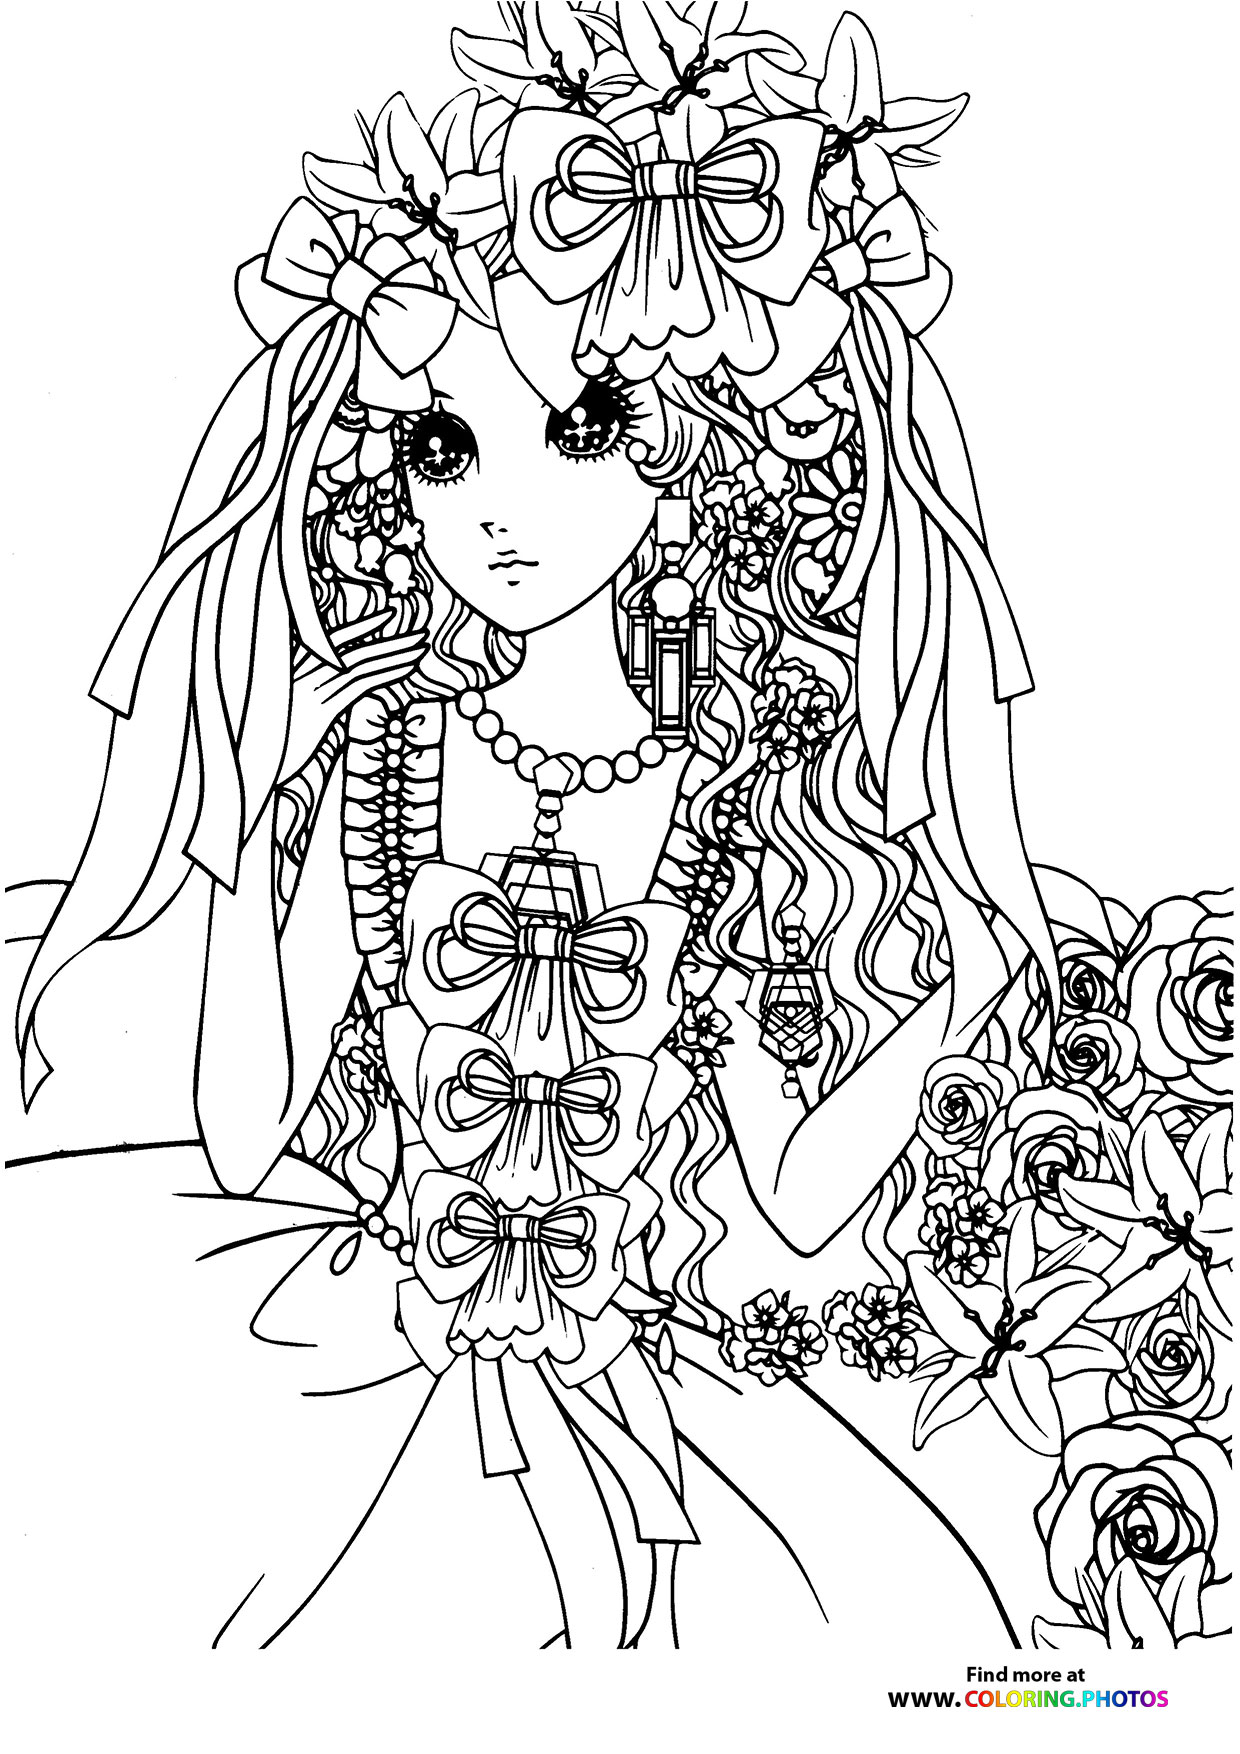 Coloring pages for adults - Girls category | Free and easy print or